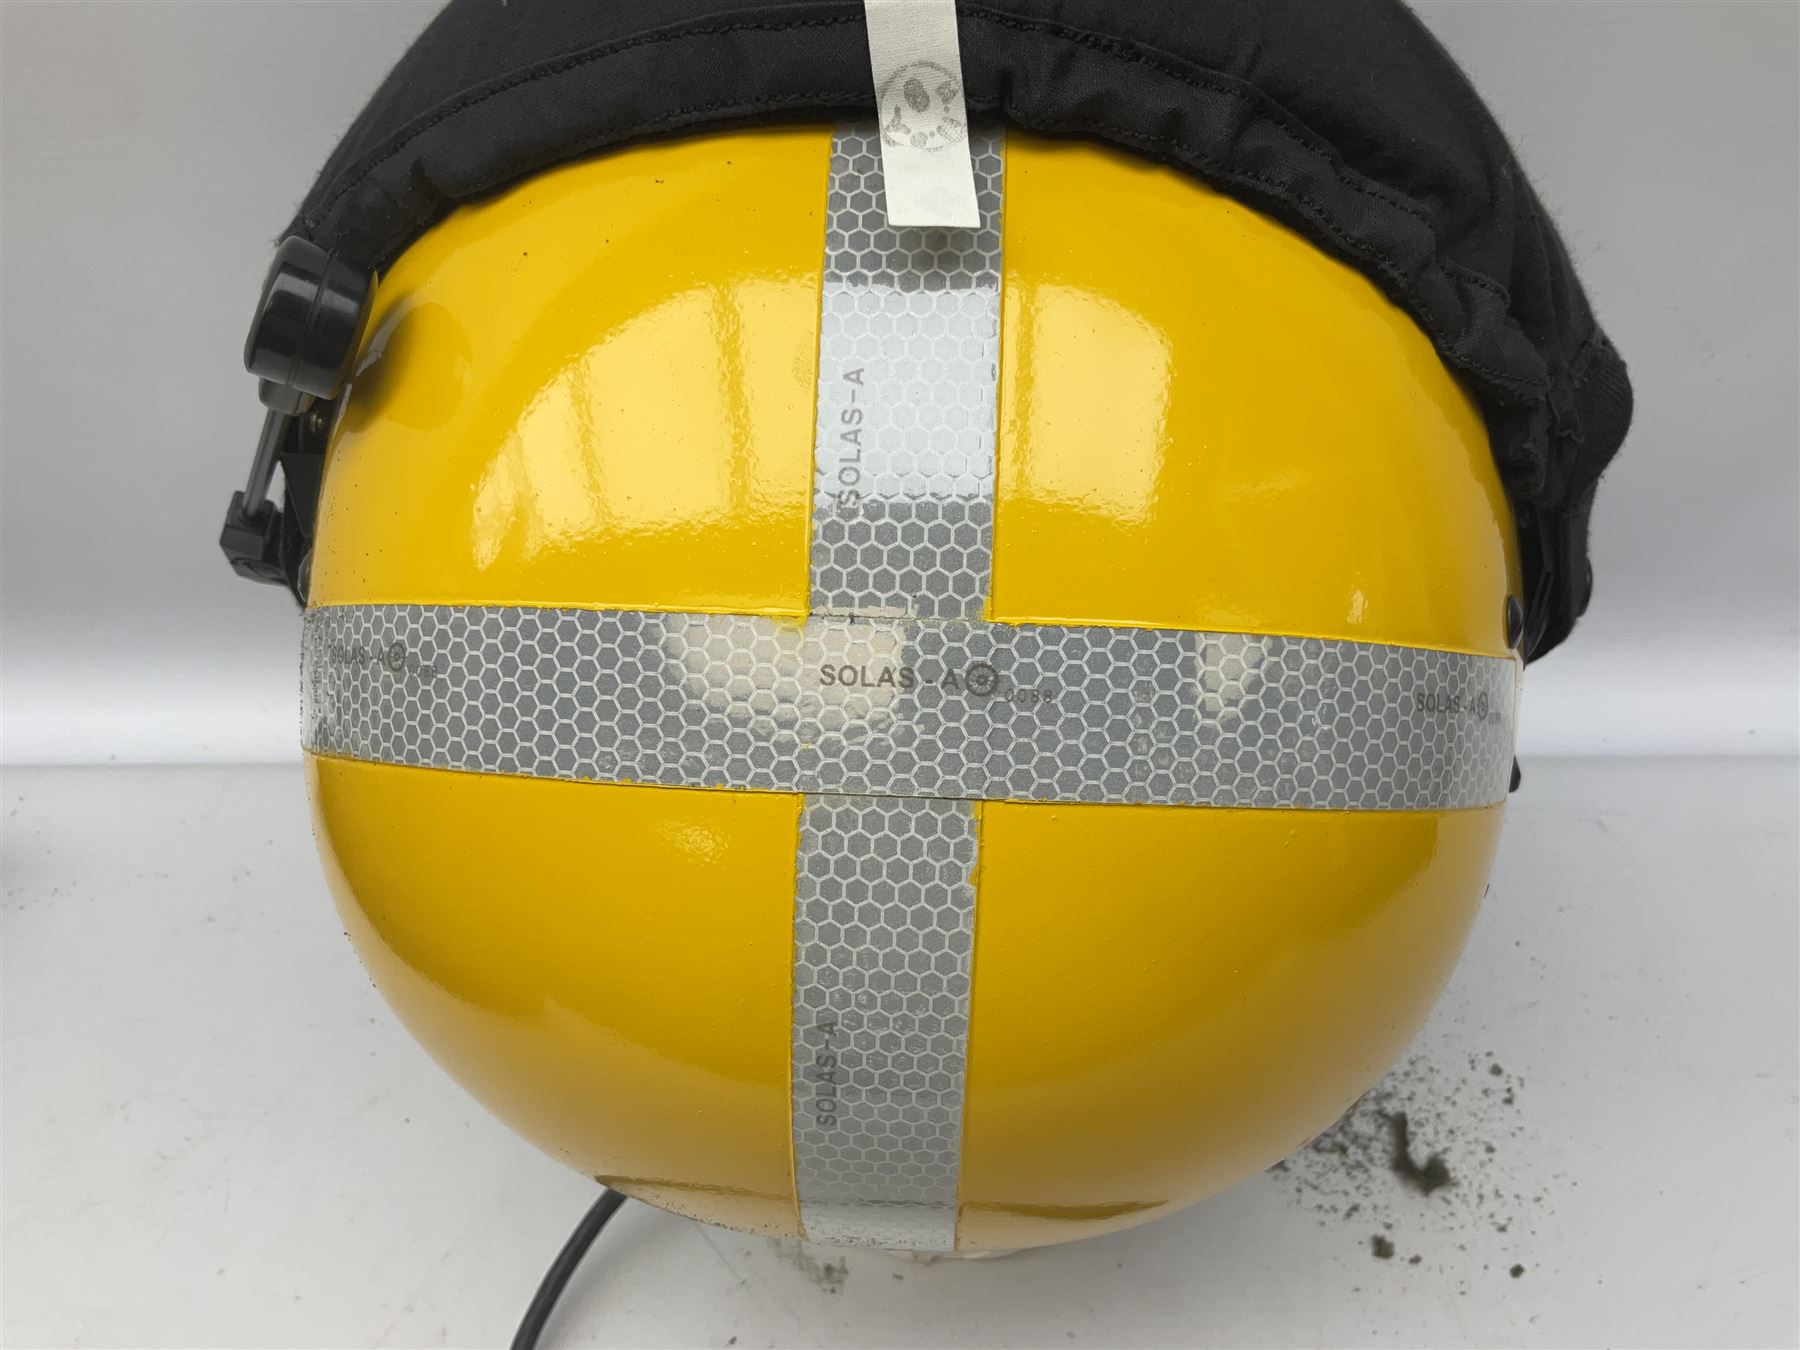 Search and Rescue Mark IV/IVA Flying helmet with boom microphone - Image 12 of 32